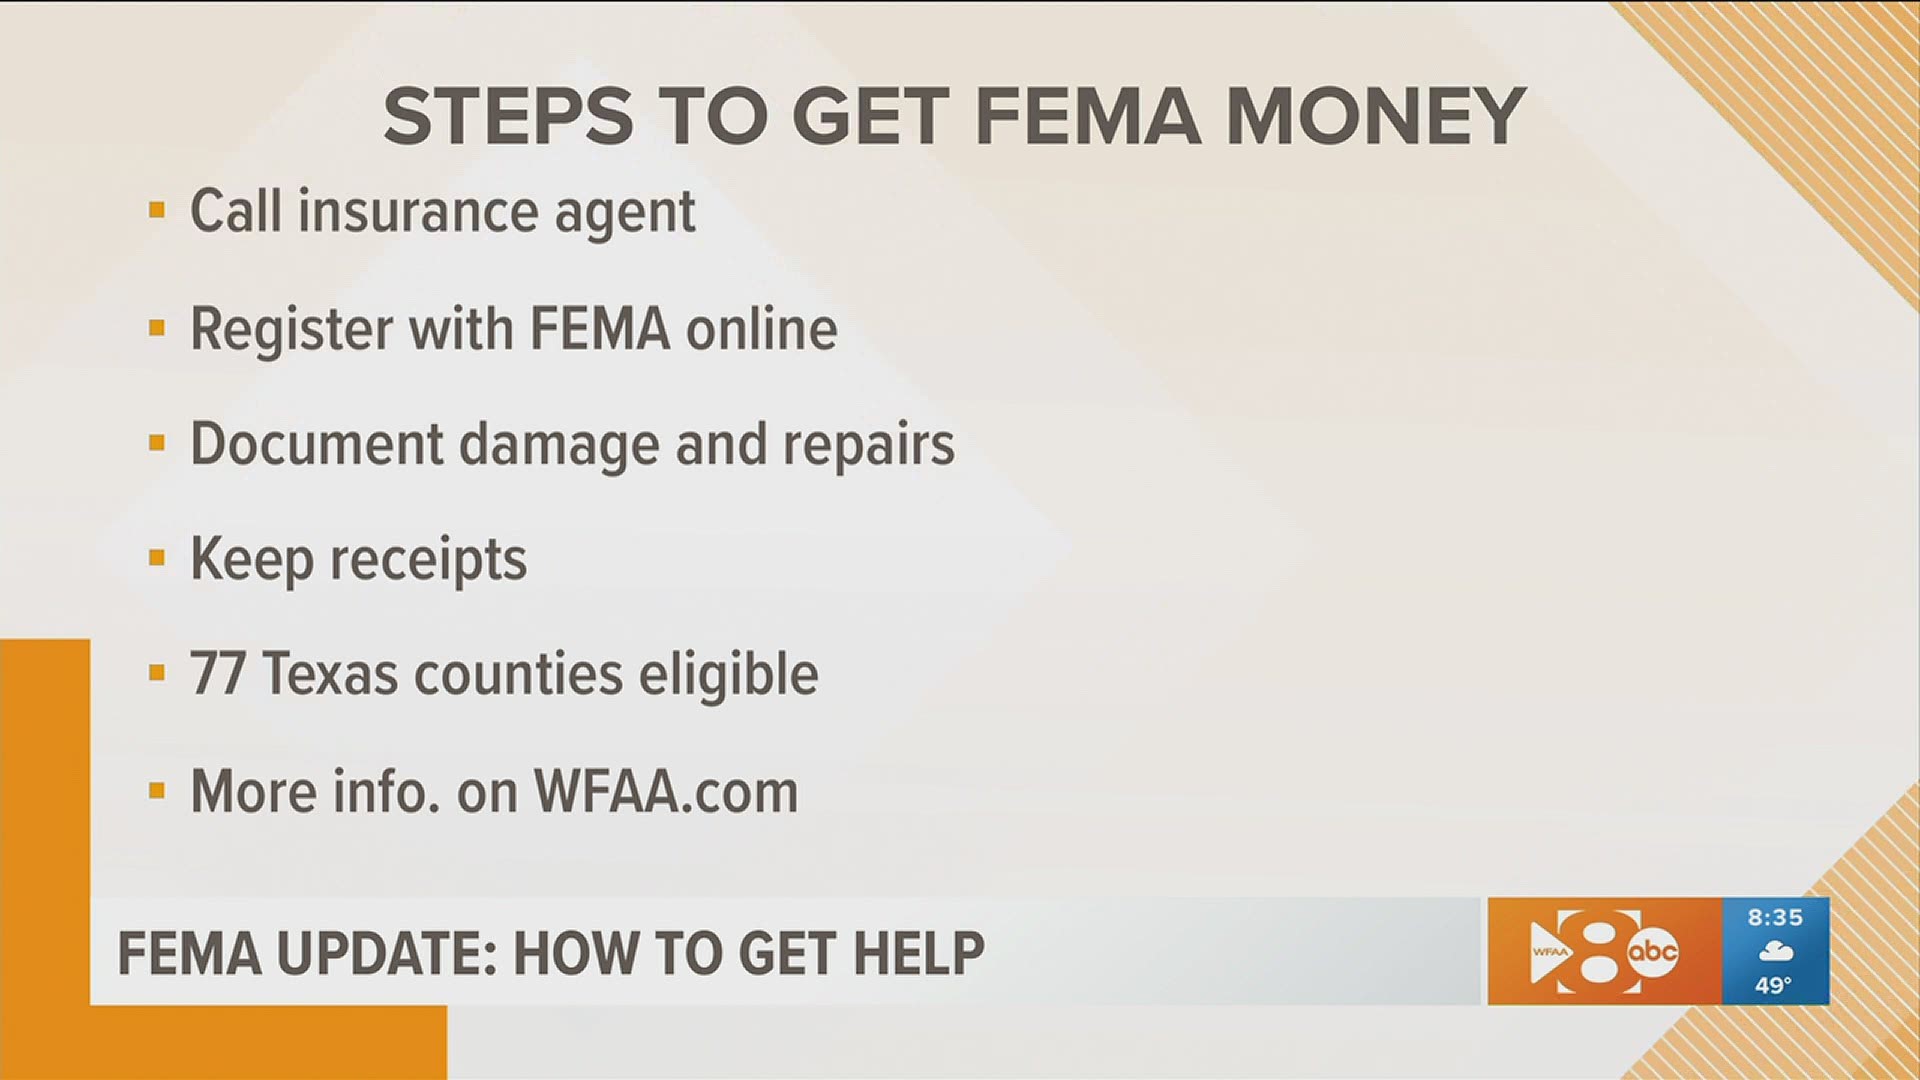 FEMA said the assistance can include grants for temporary housing, home repairs, and low-cost loans.